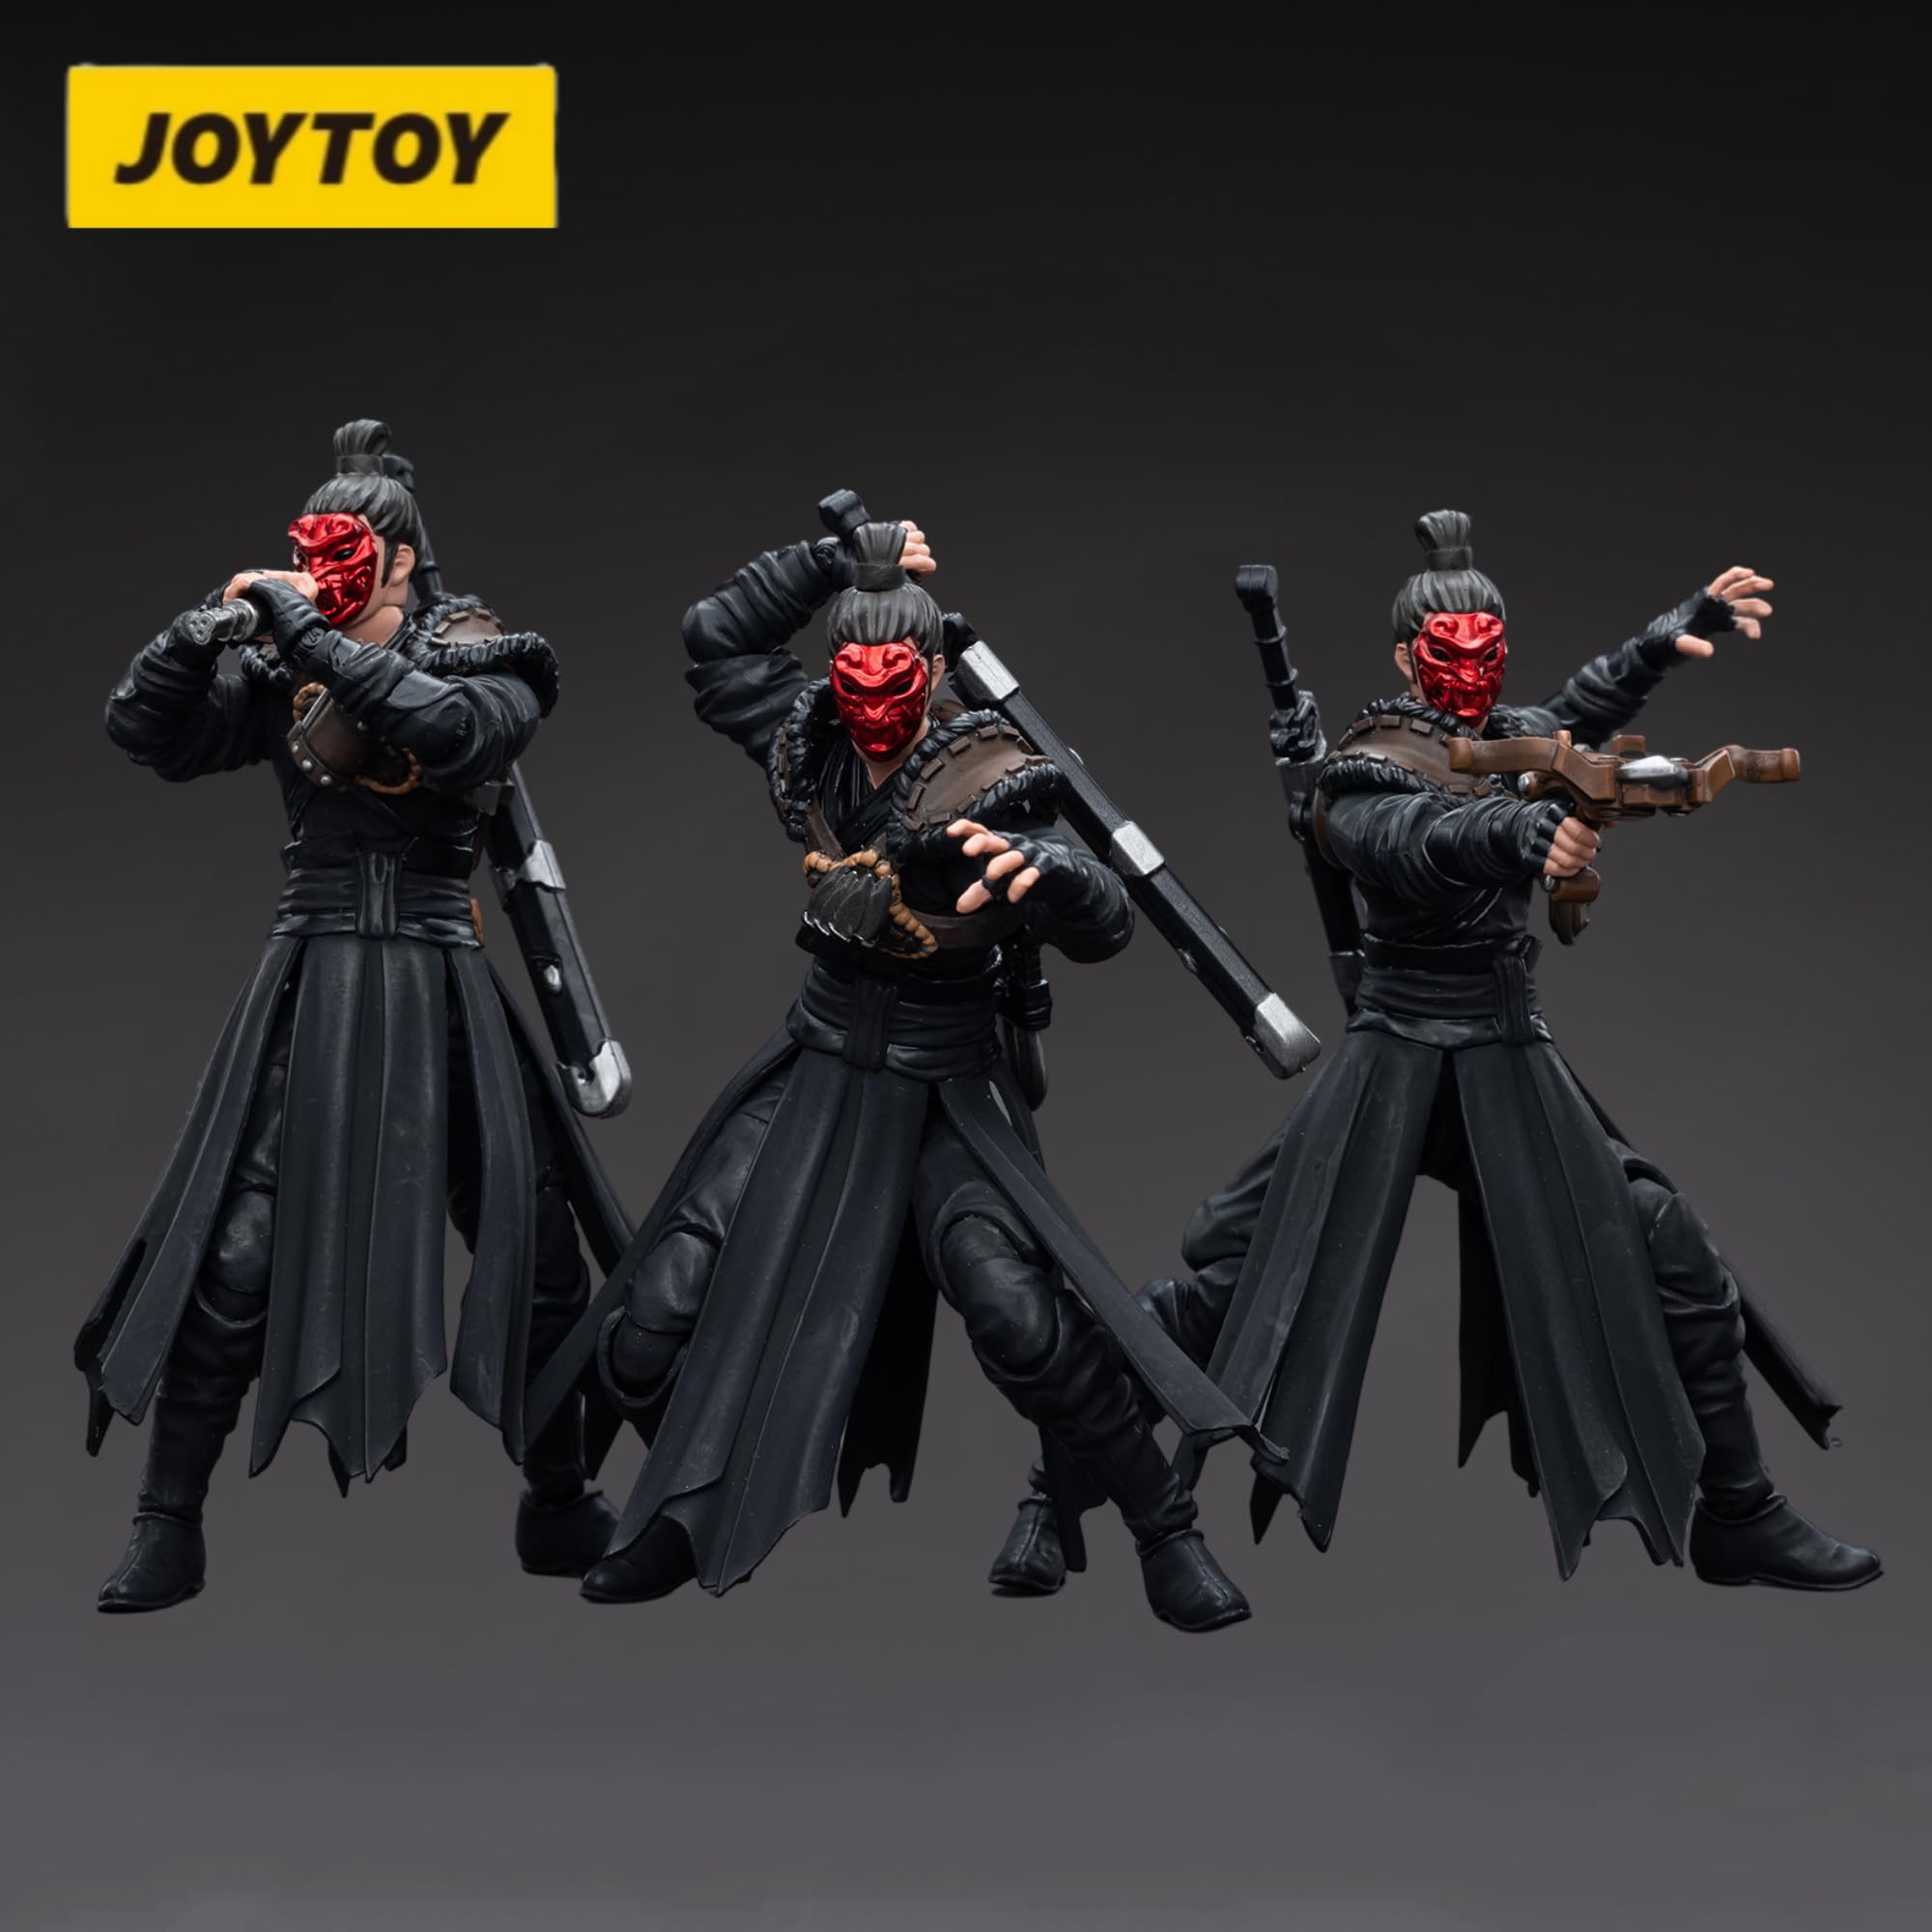 JOYTOY 1/18 Action Figure Dark Source Jiang Hu Chost Gate Assassin Collectible Military Model(Set of 3 Figures)